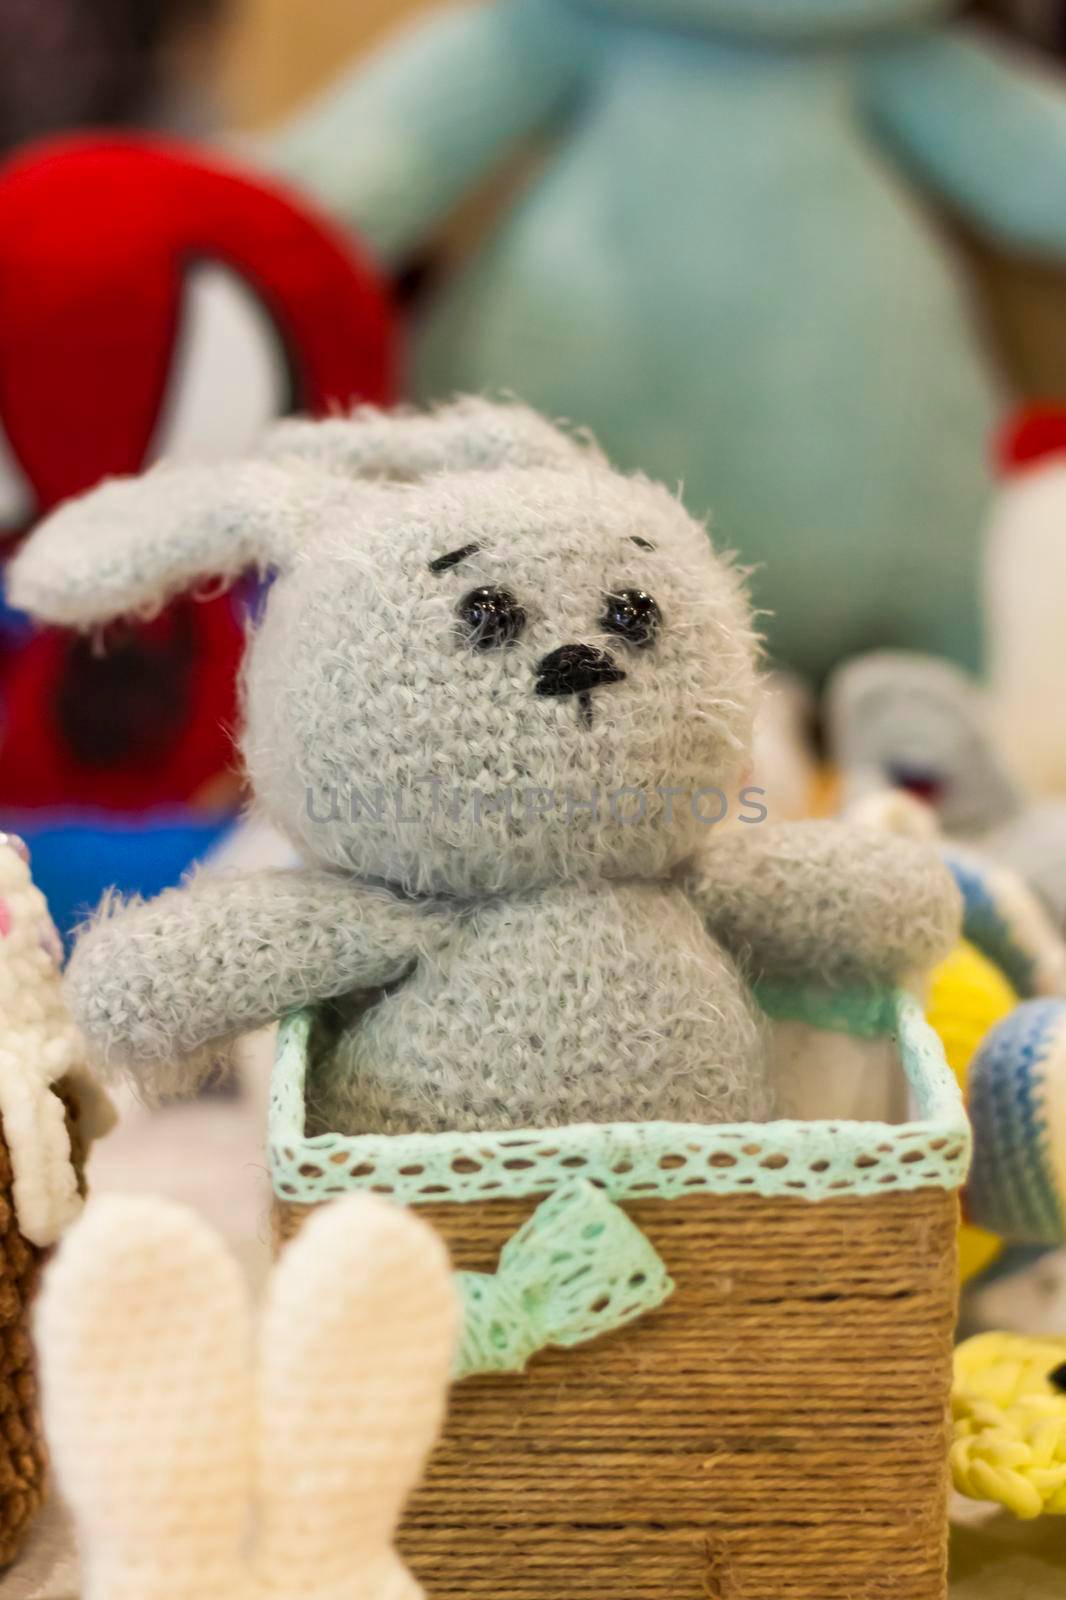 Knitted toys. Crocheted cute little animals. handmade toy, Plush Stuffed toys, Cute little animals 